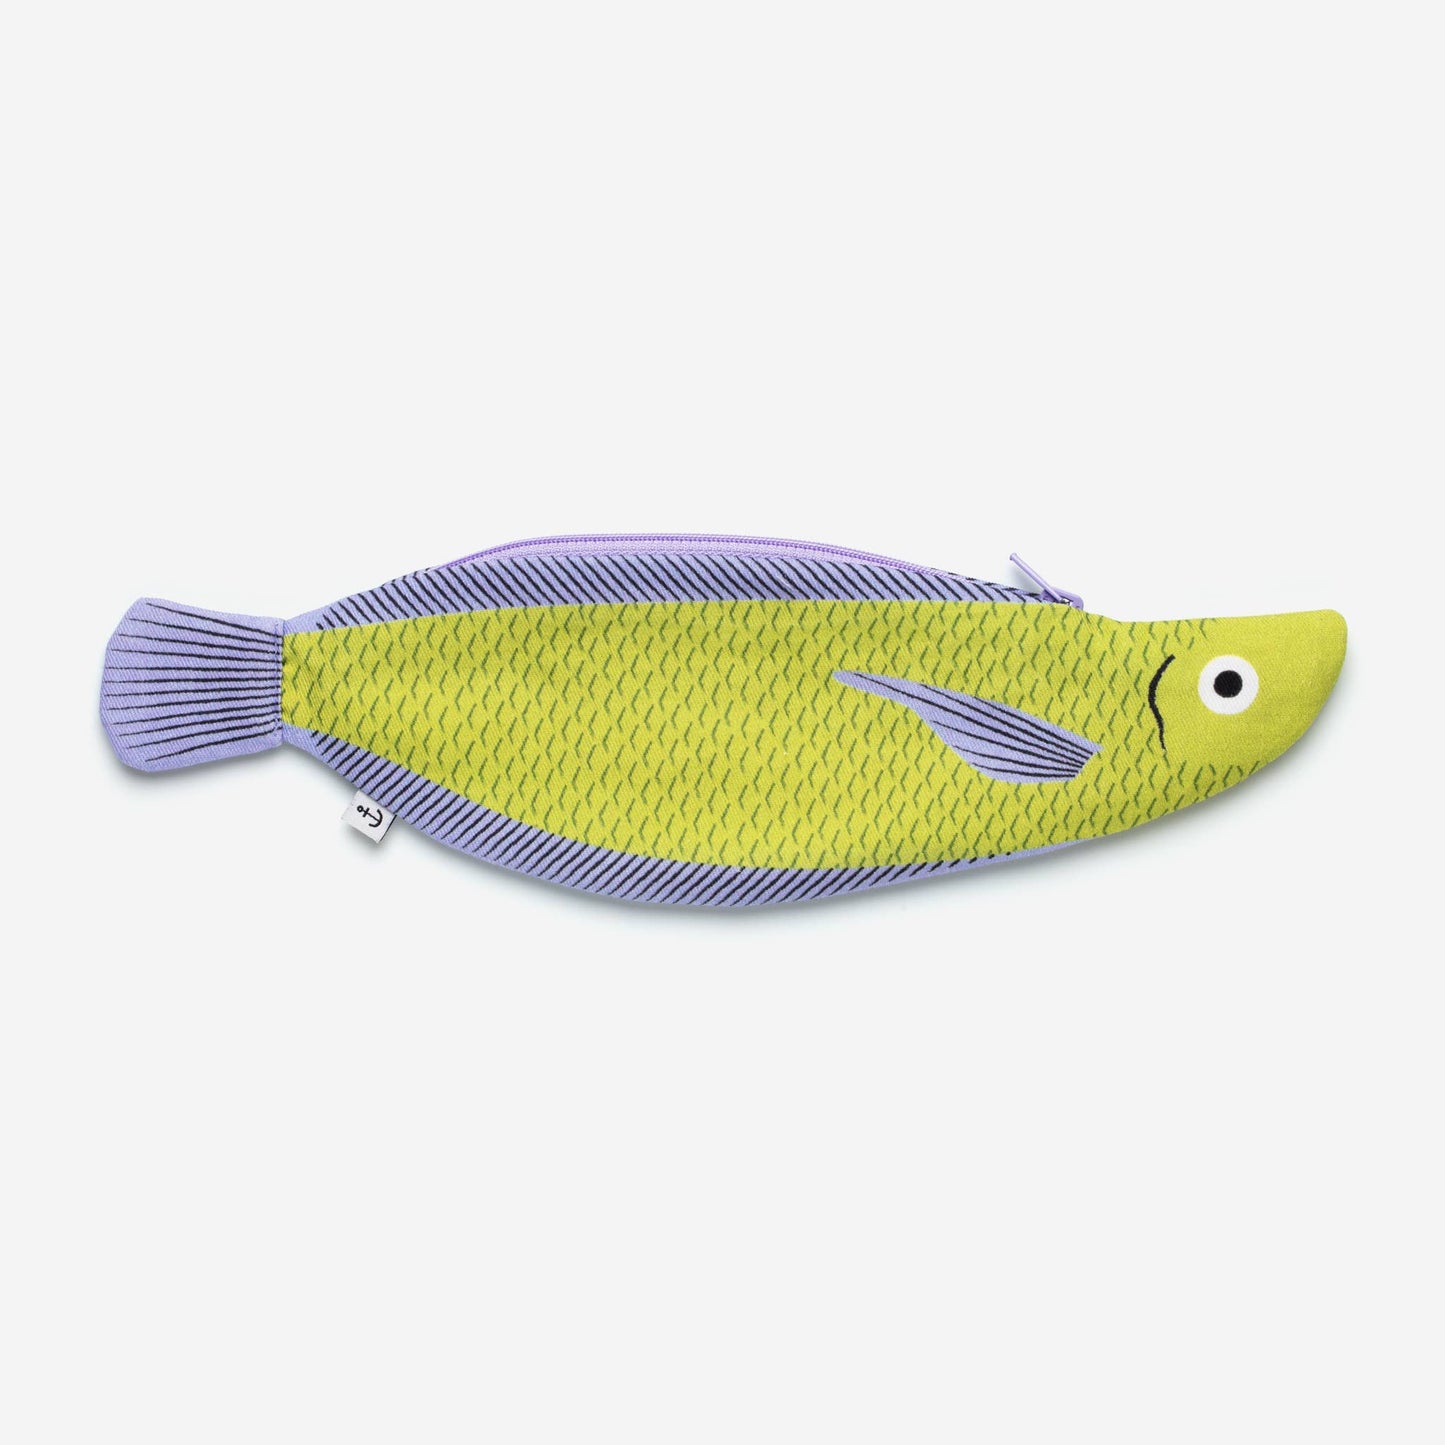 Chartreuse and lilac Arawana fish zippered pouch